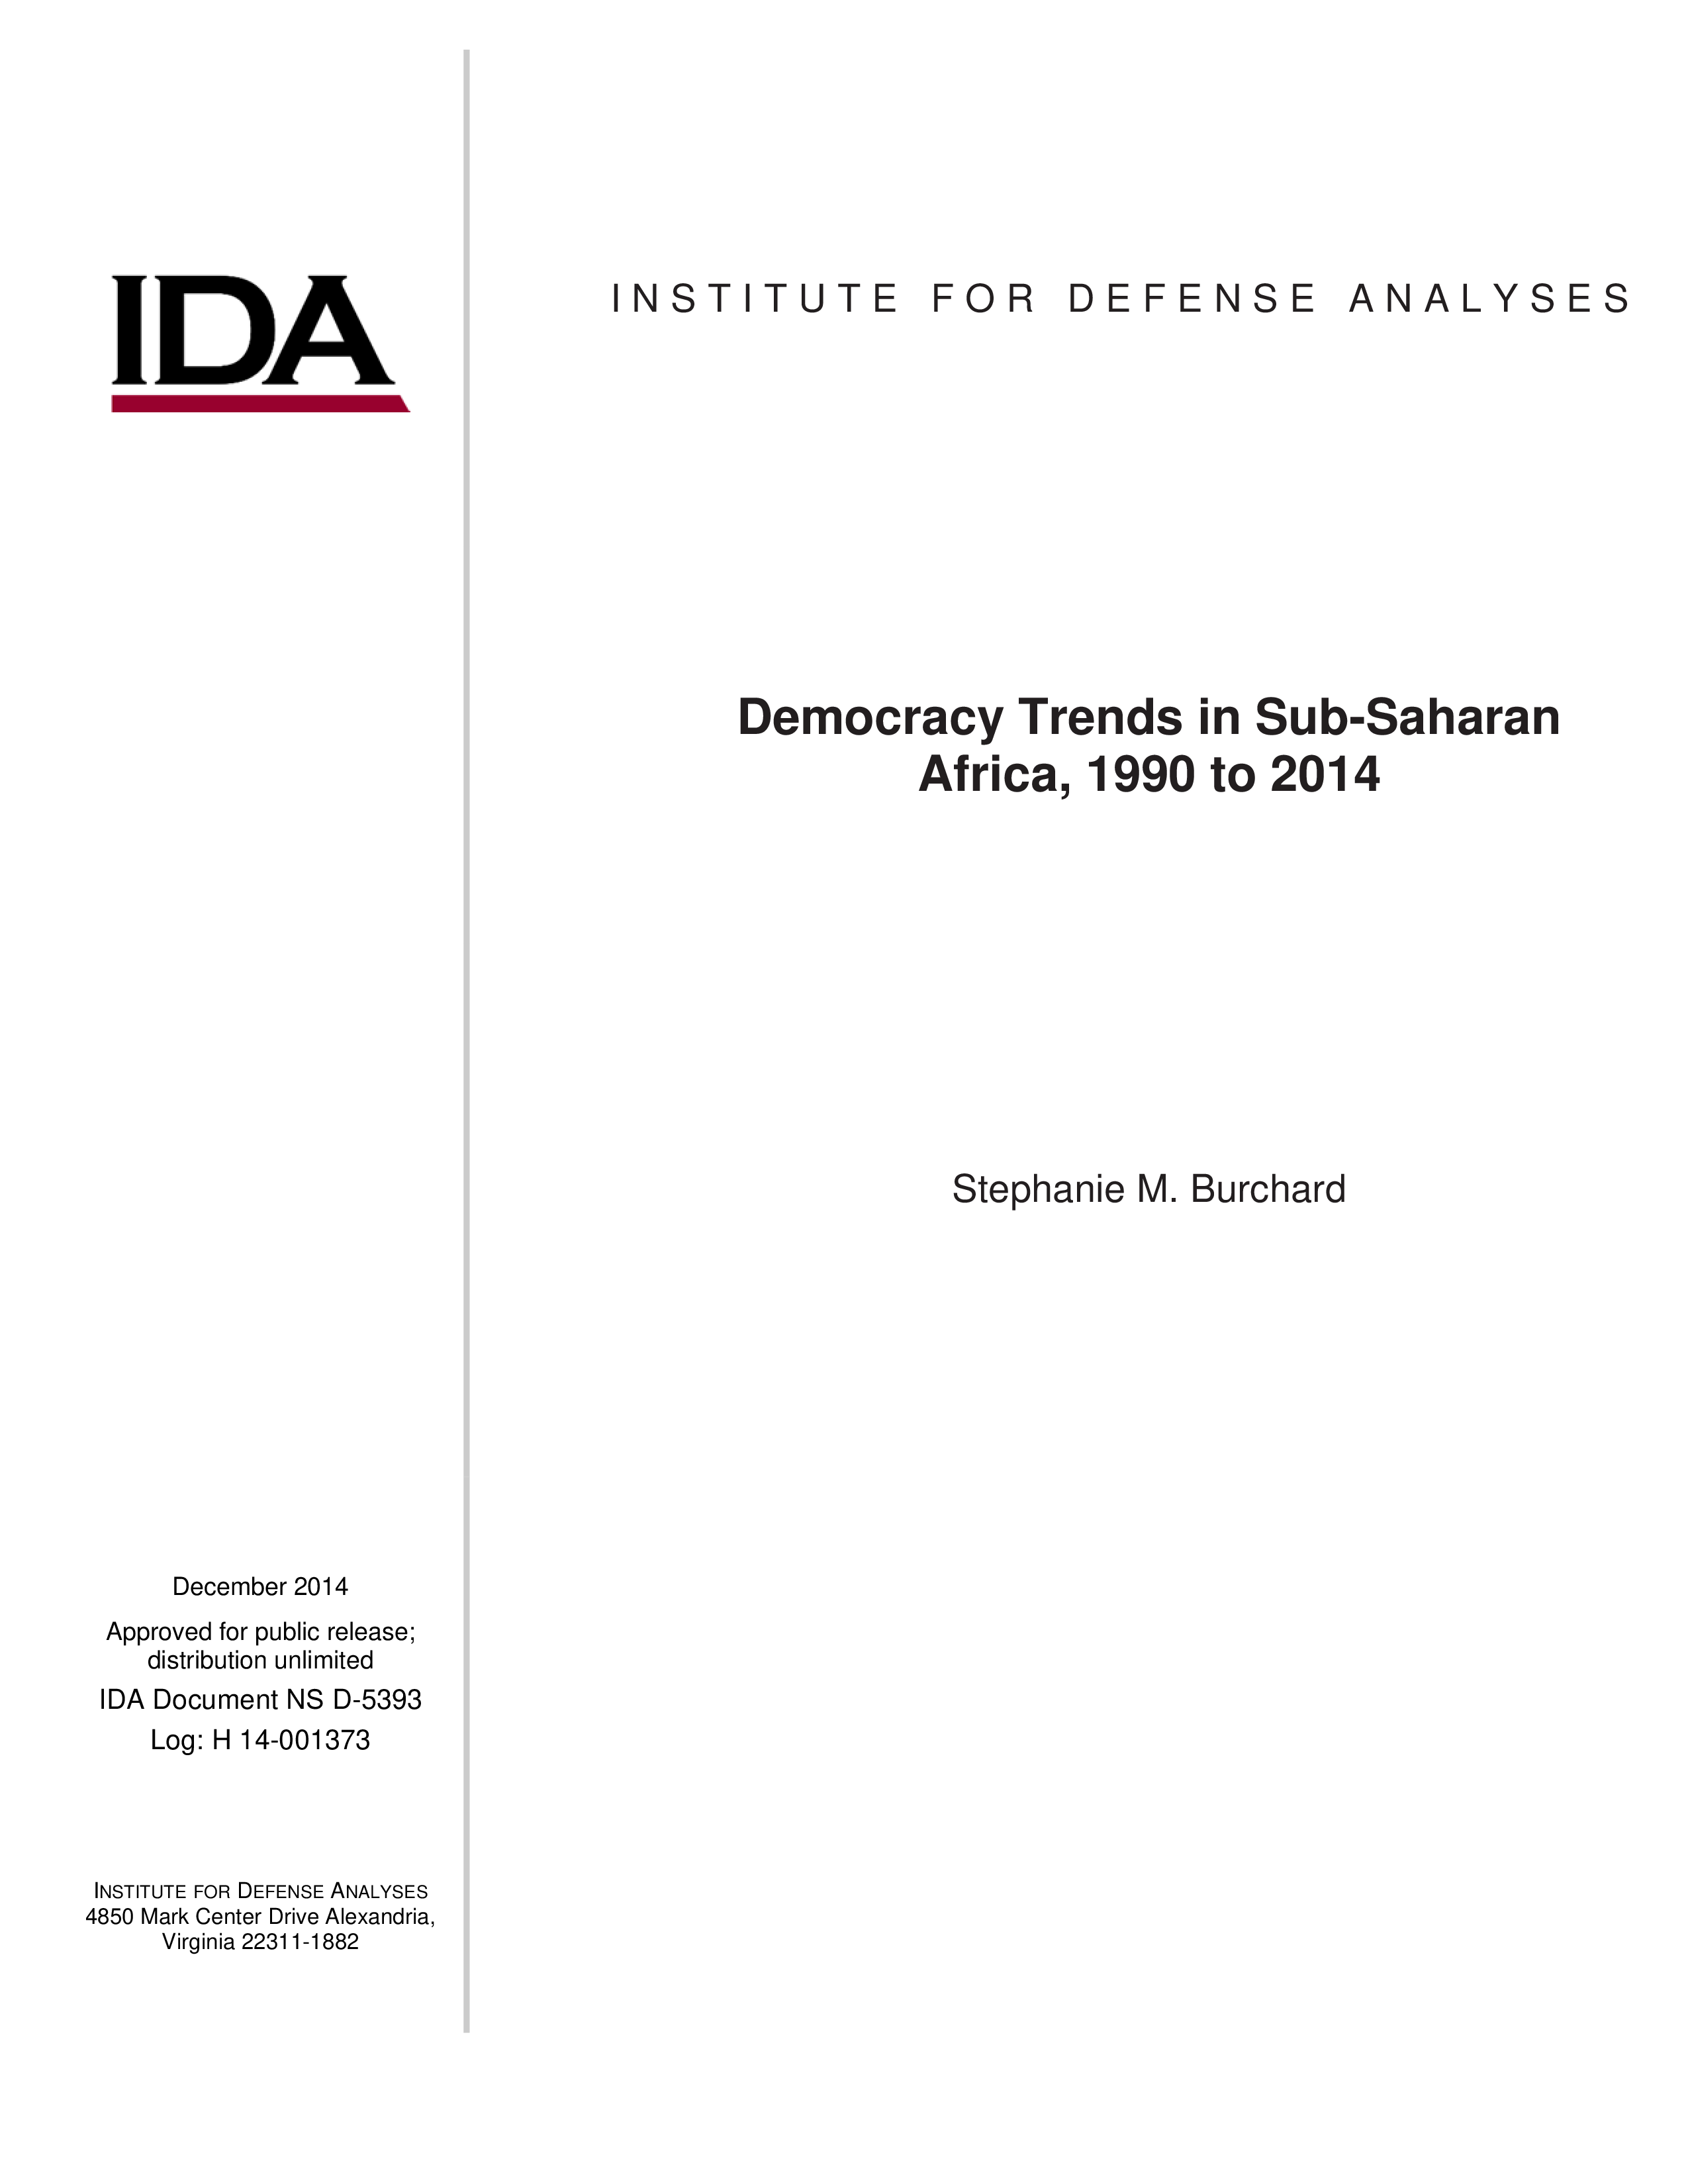 Democracy Trends in Sub-Saharan Africa, 1990 to 2014